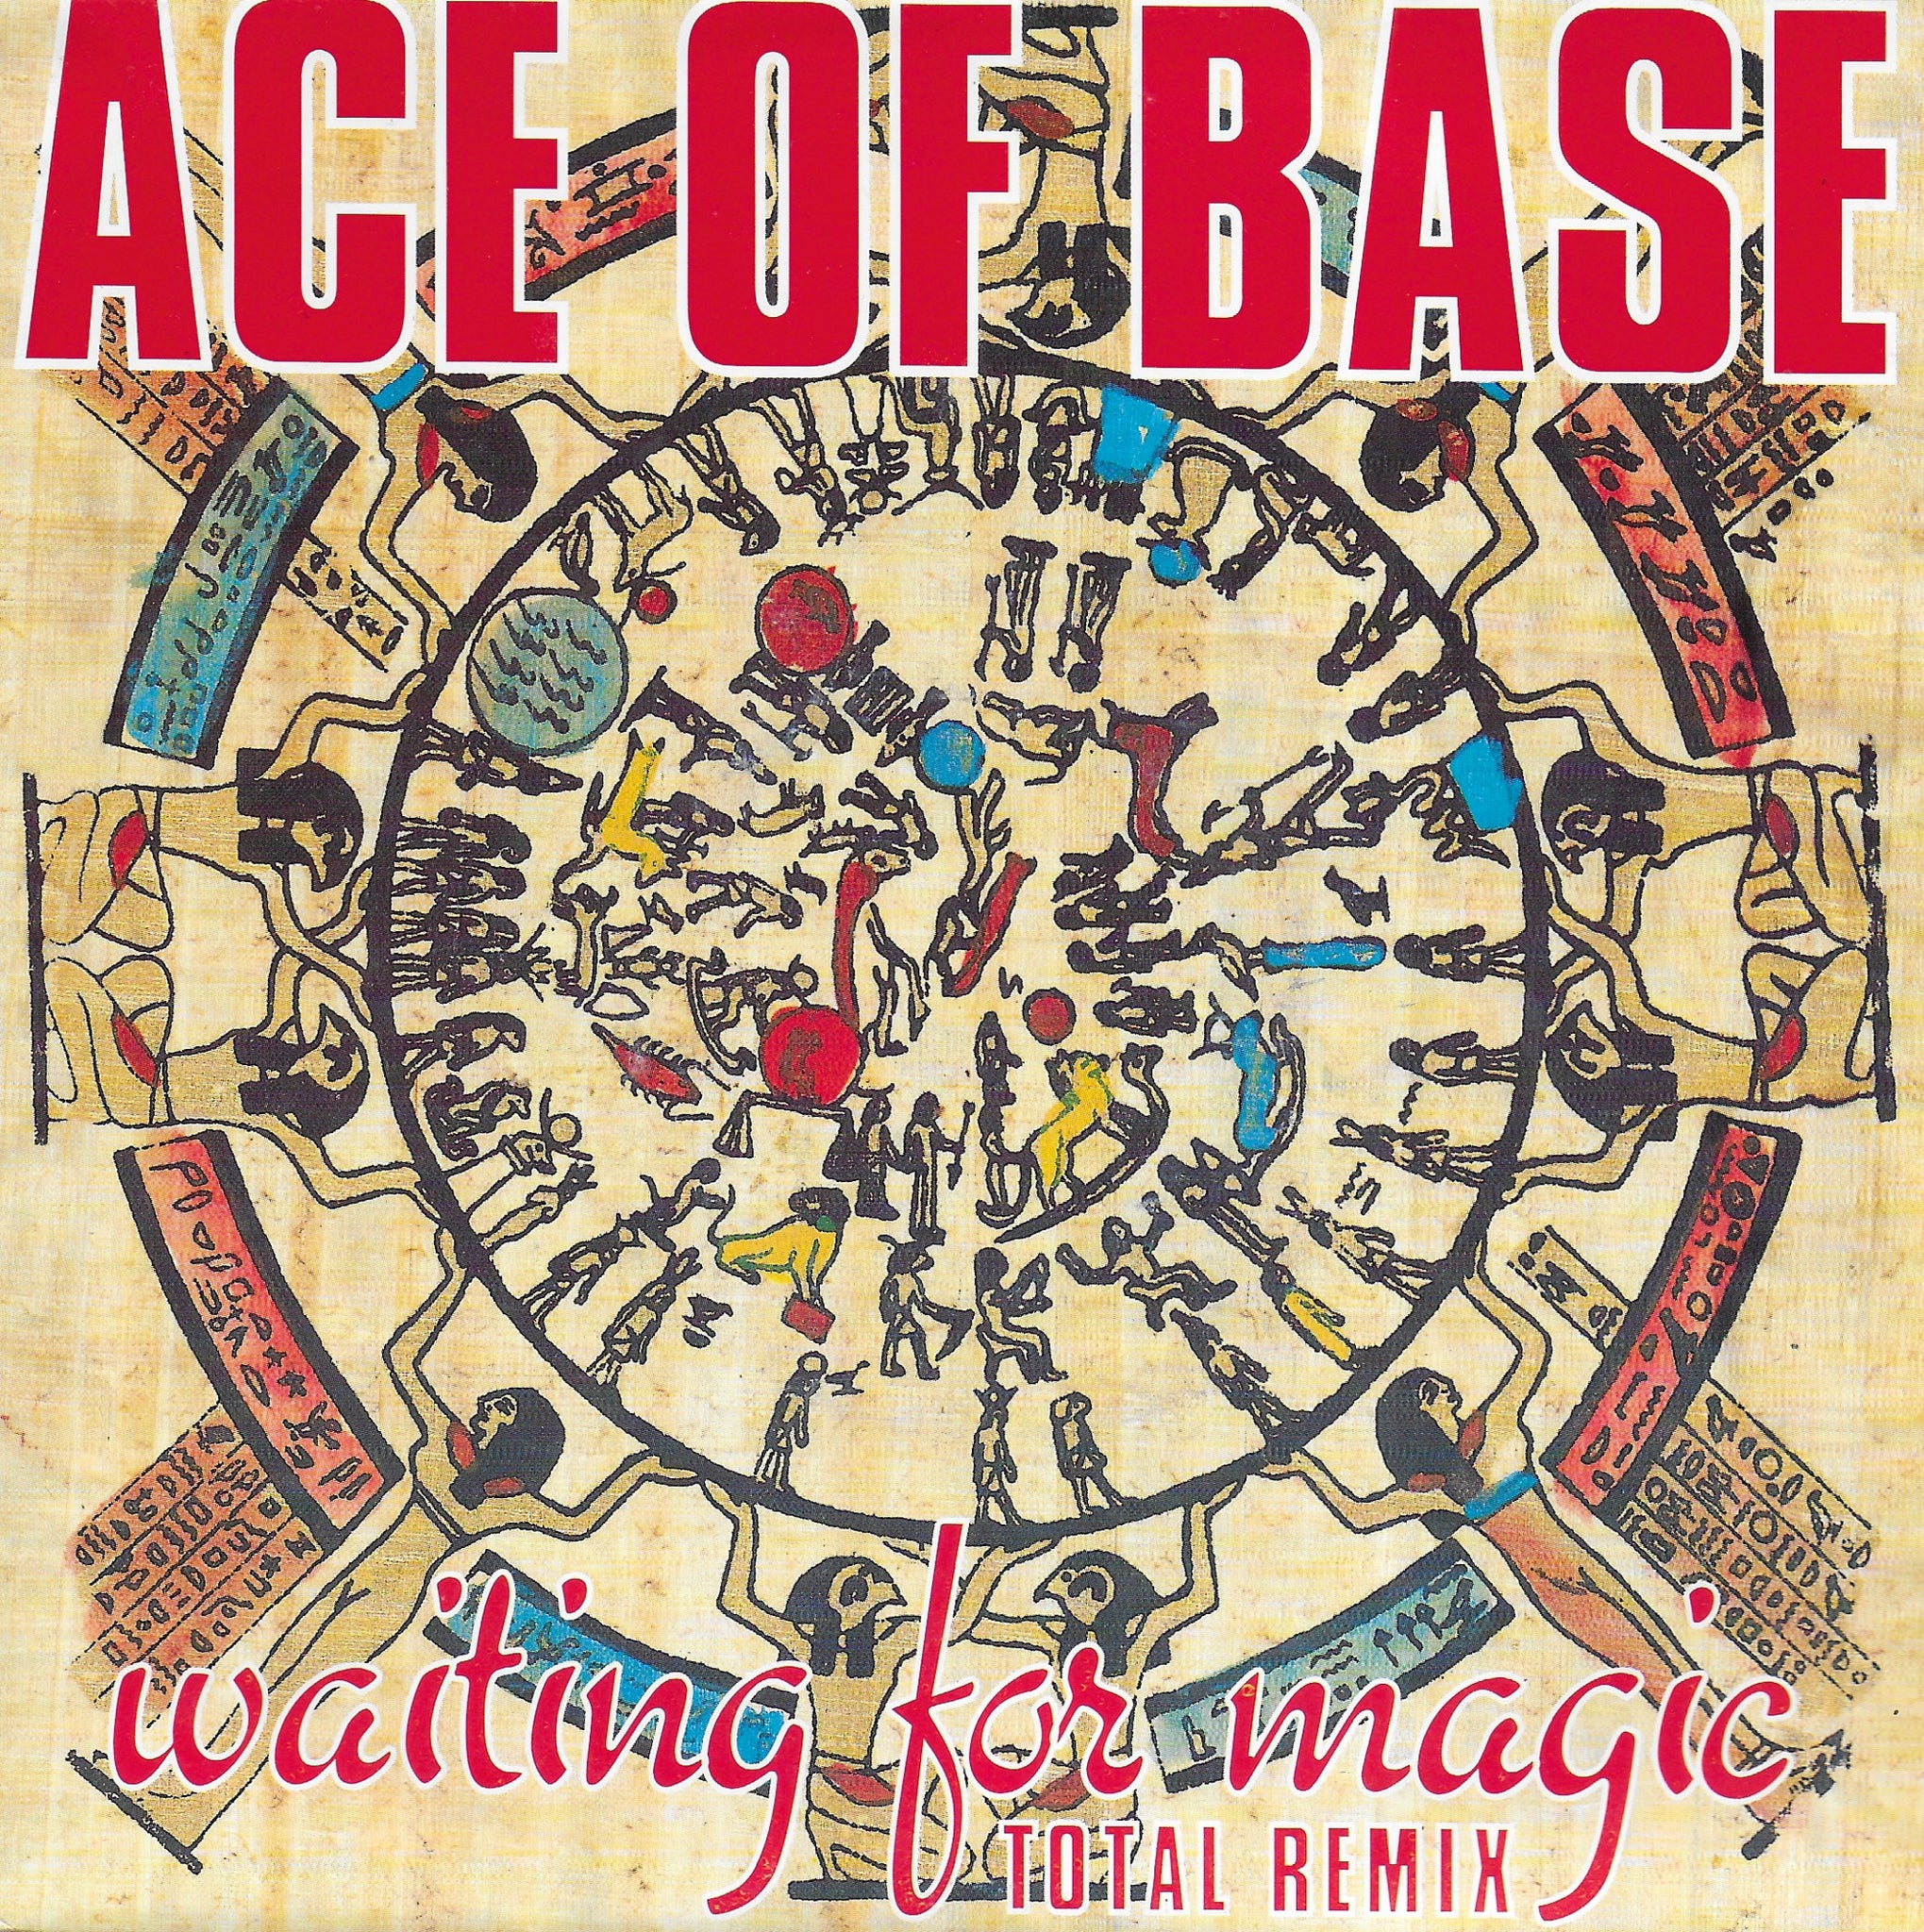 Ace of Base - Waiting for magic